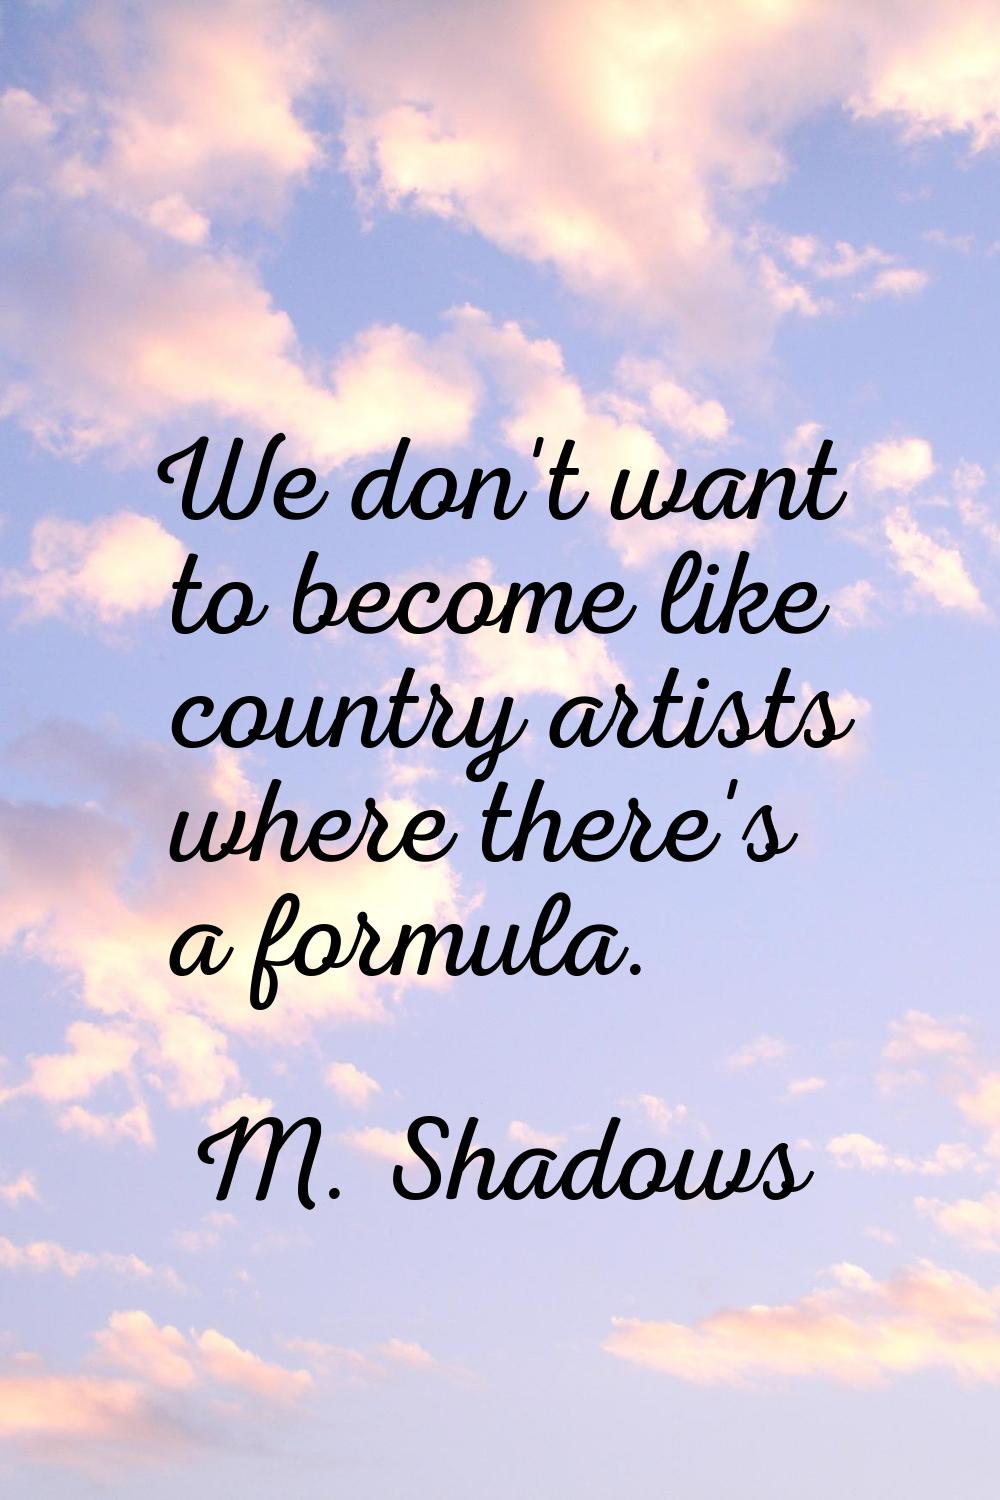 We don't want to become like country artists where there's a formula.